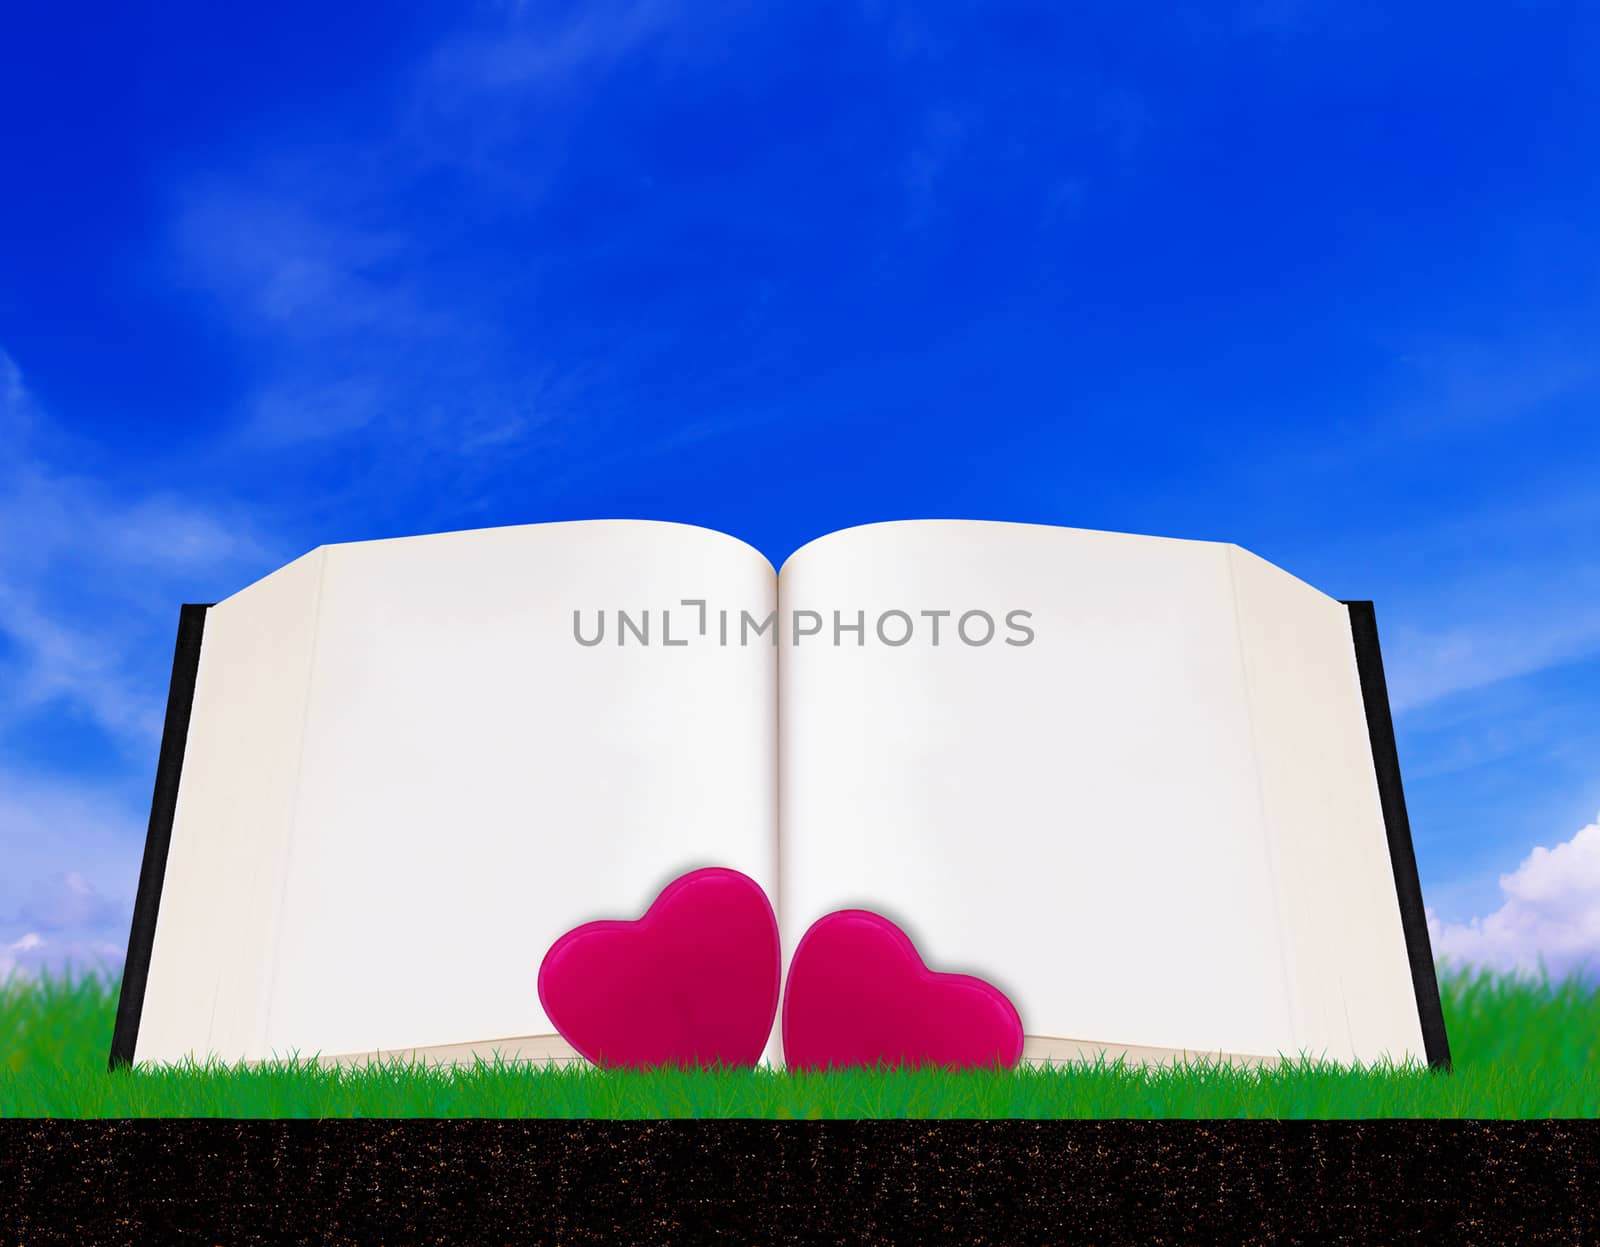 Love story and valentine day concept on blue sky background, open book and heart, copy space